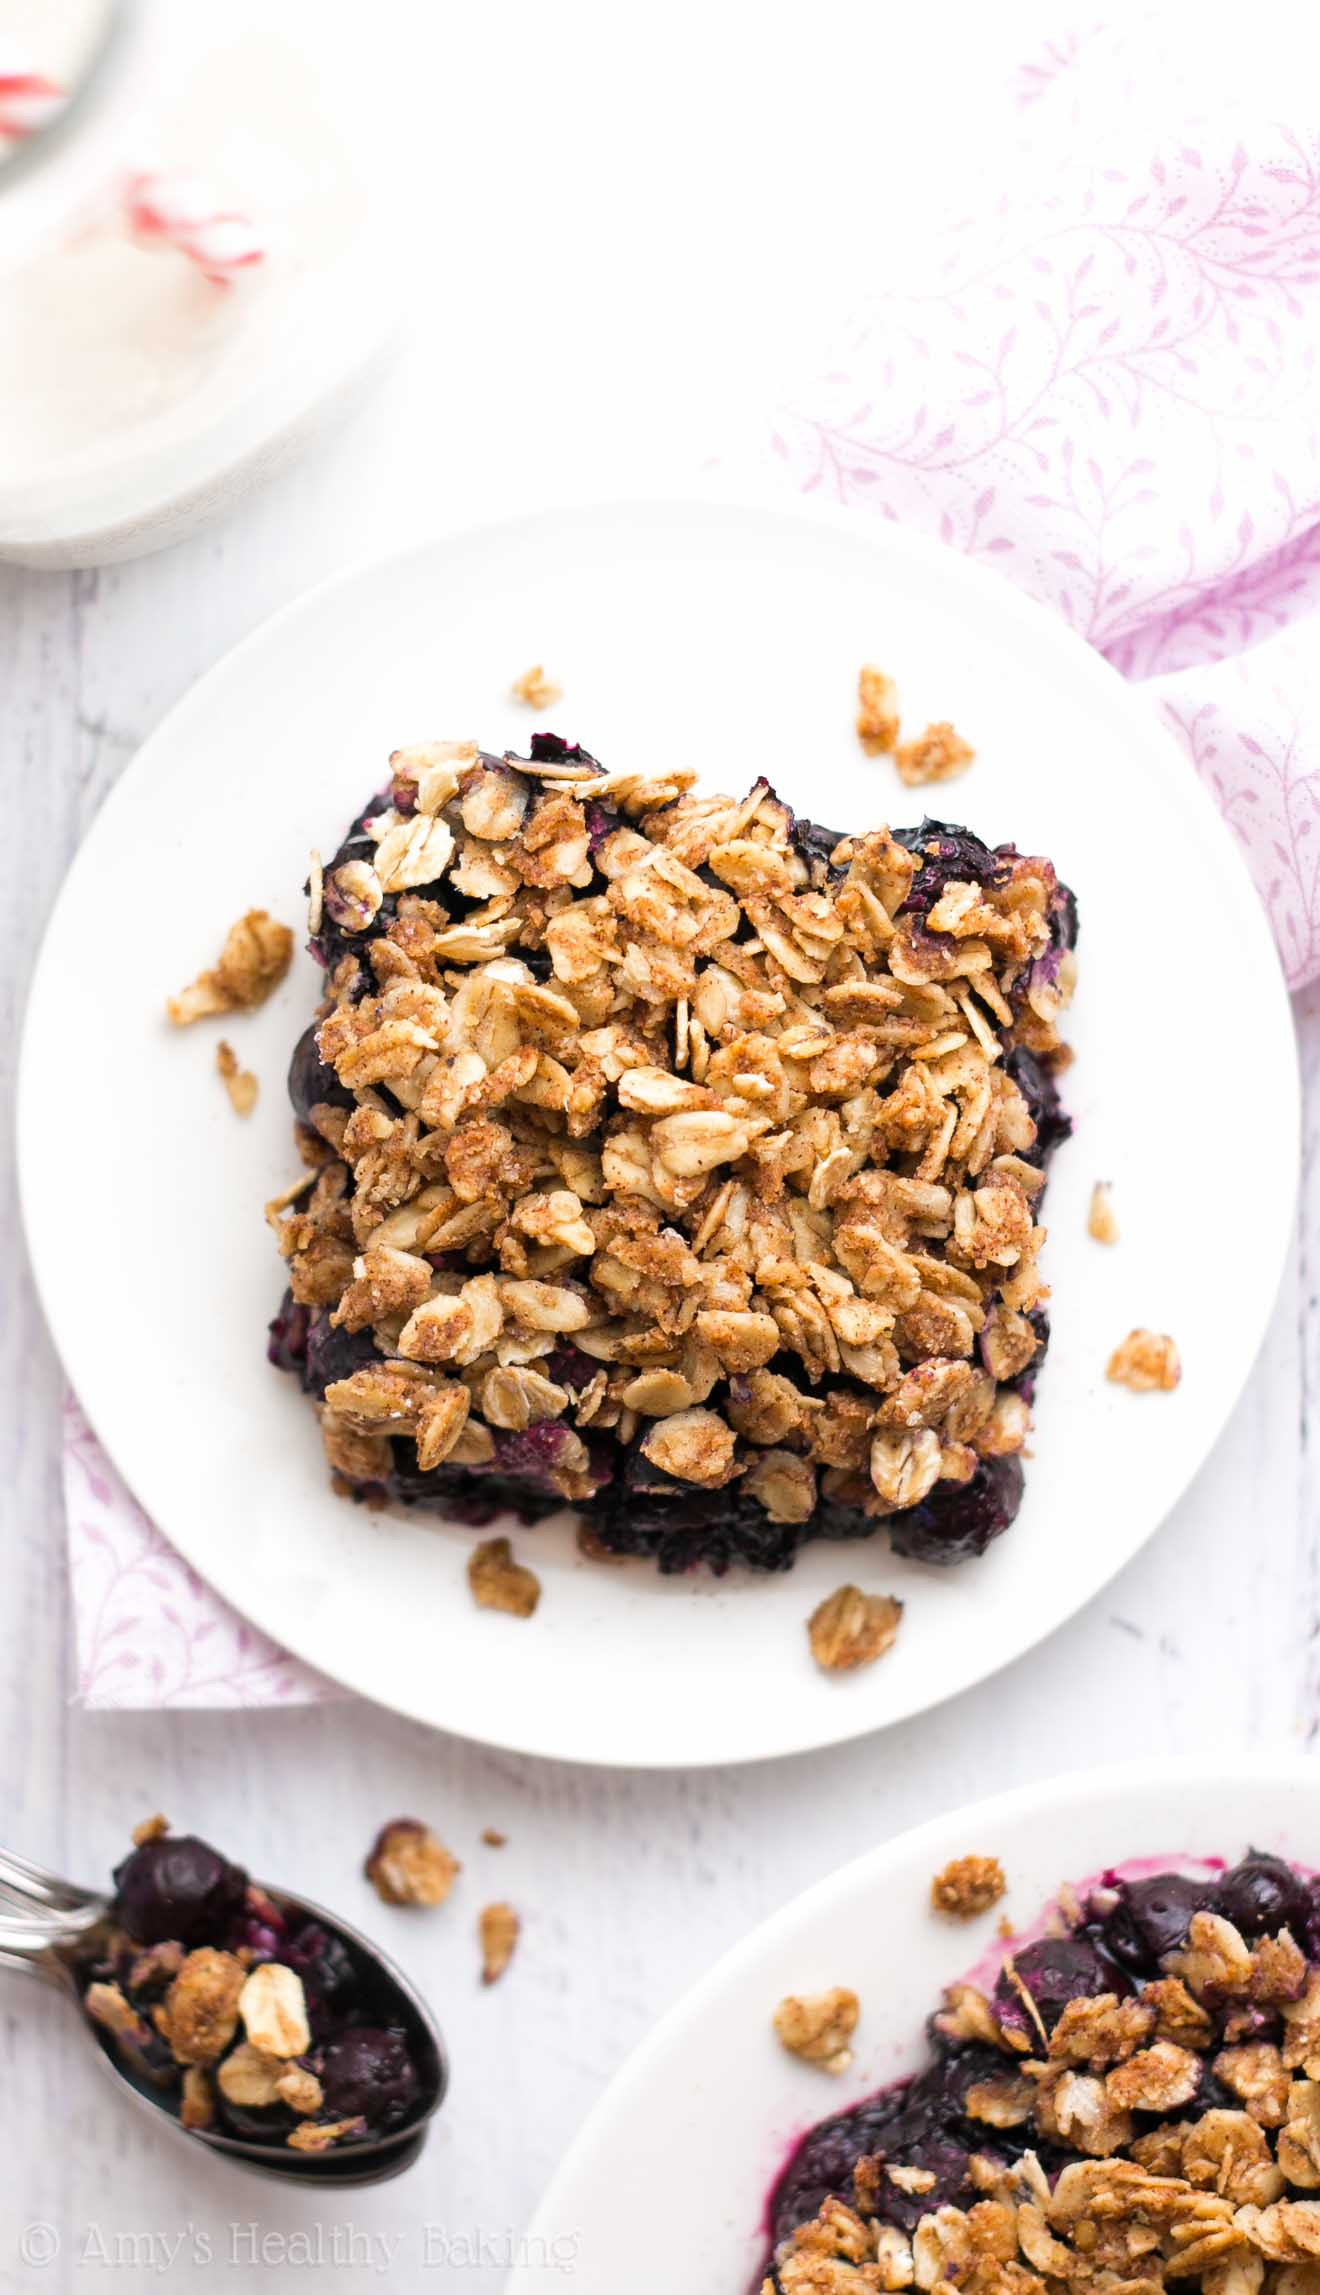 Healthy Blueberry Desserts
 The Ultimate Healthy Blueberry Crumble Recipe Video